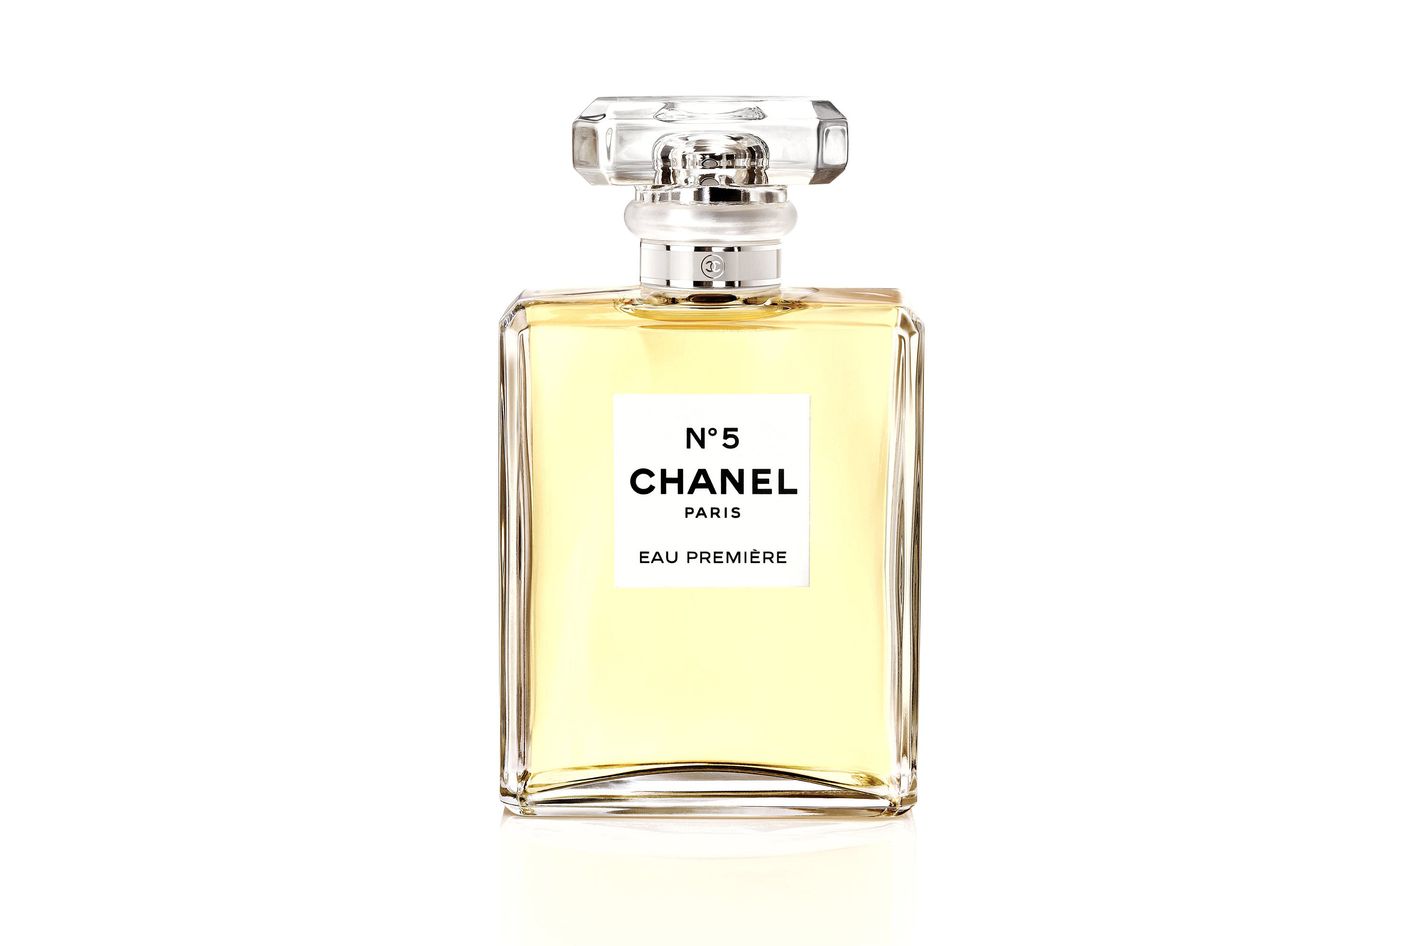 The World's Most Classic Scent Gets a Fresh Update